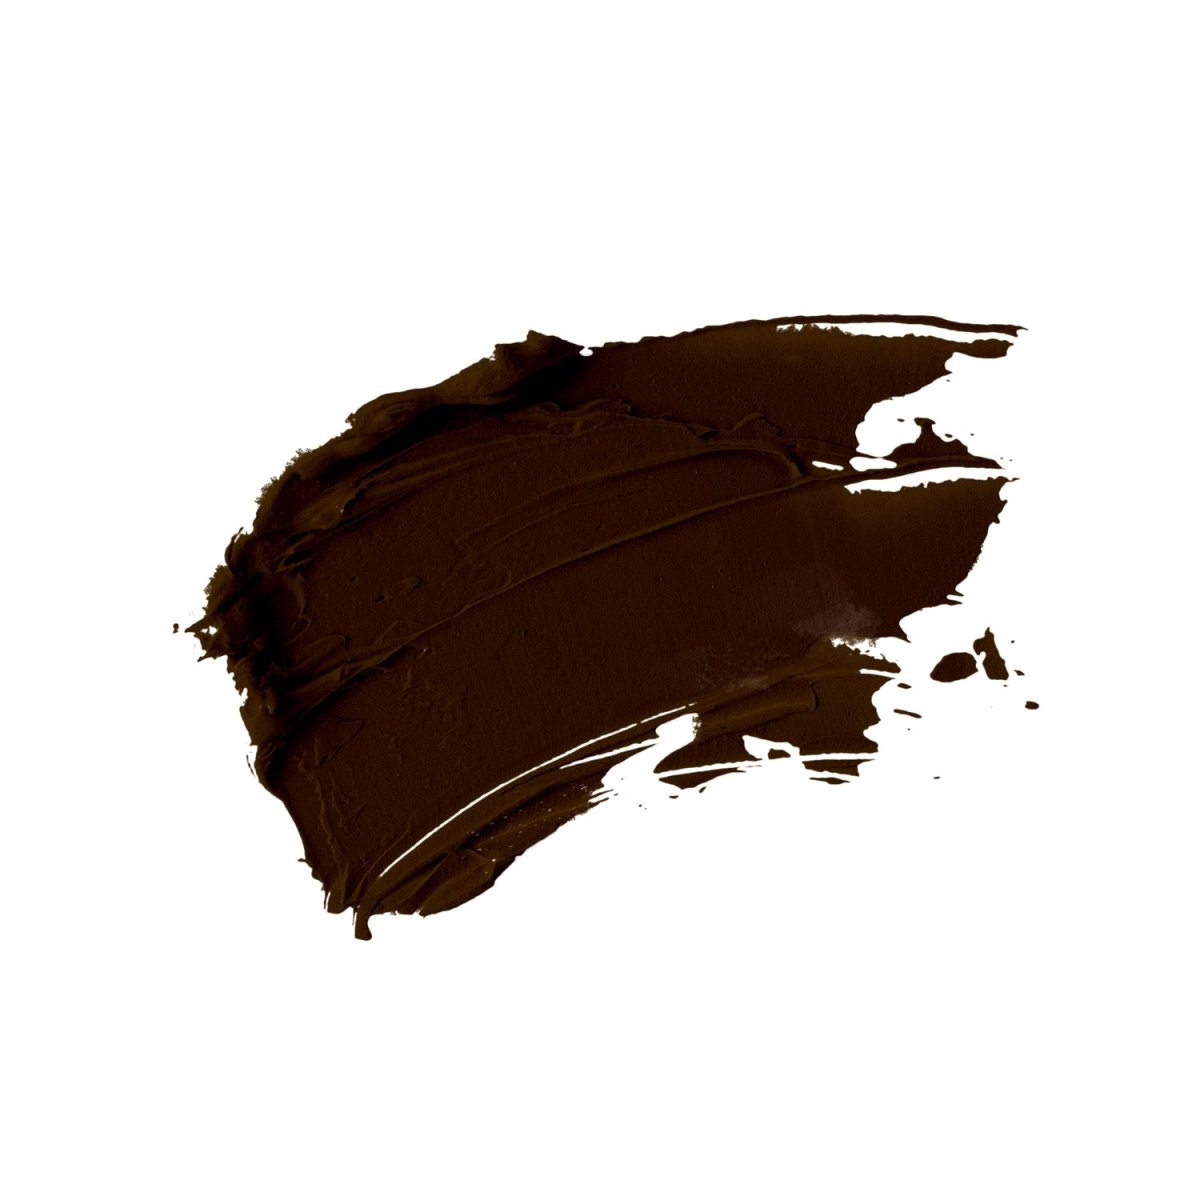 Swatch of roasted coffee tone of an oil free natural non-toxic liquid foundation